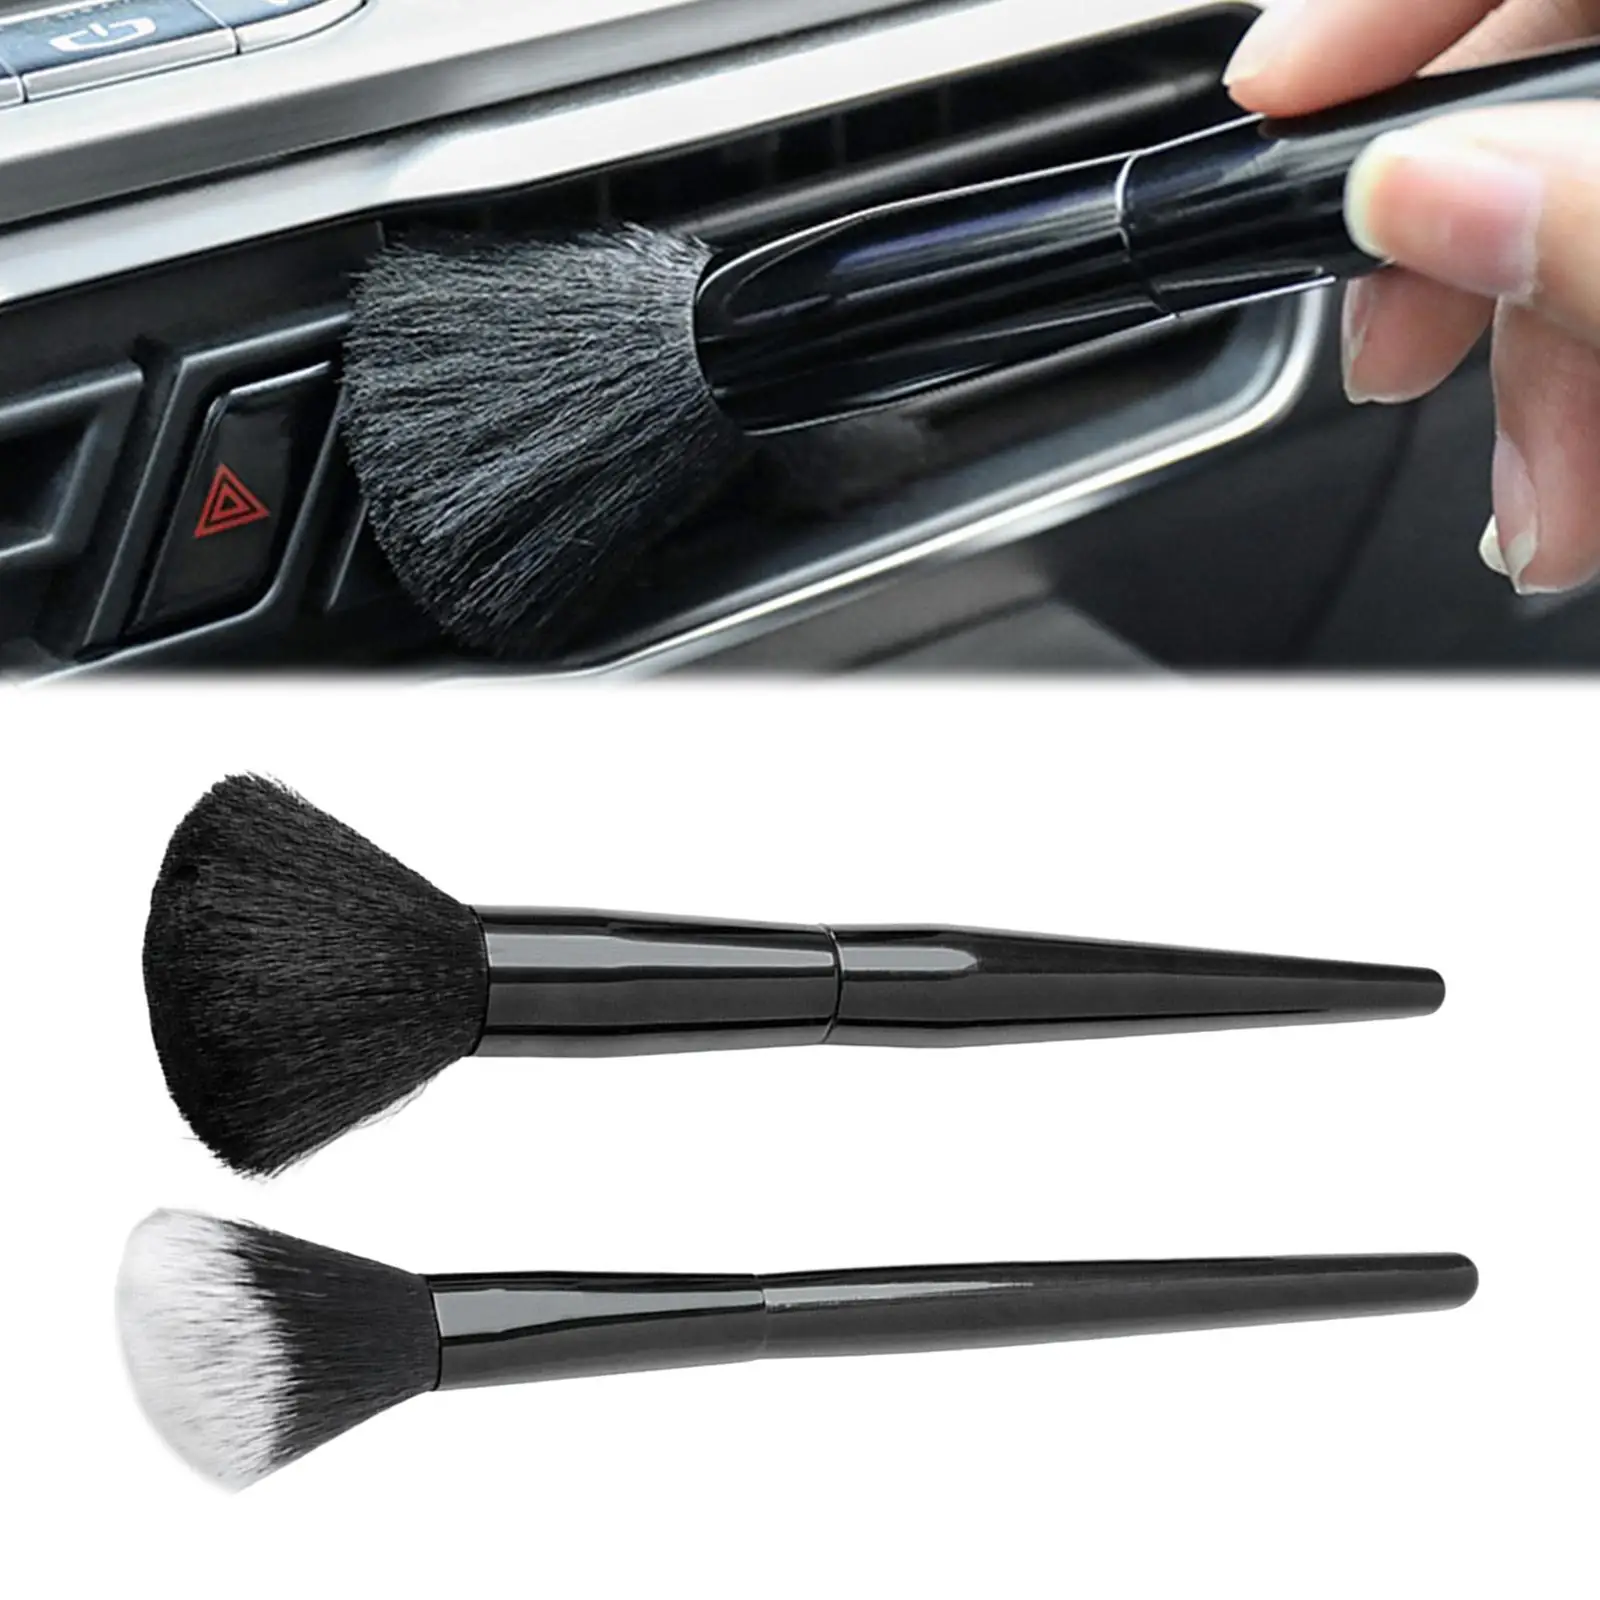 2x Car Detailing Brush with Long Handle for Air Conditioner Computer Keyboard